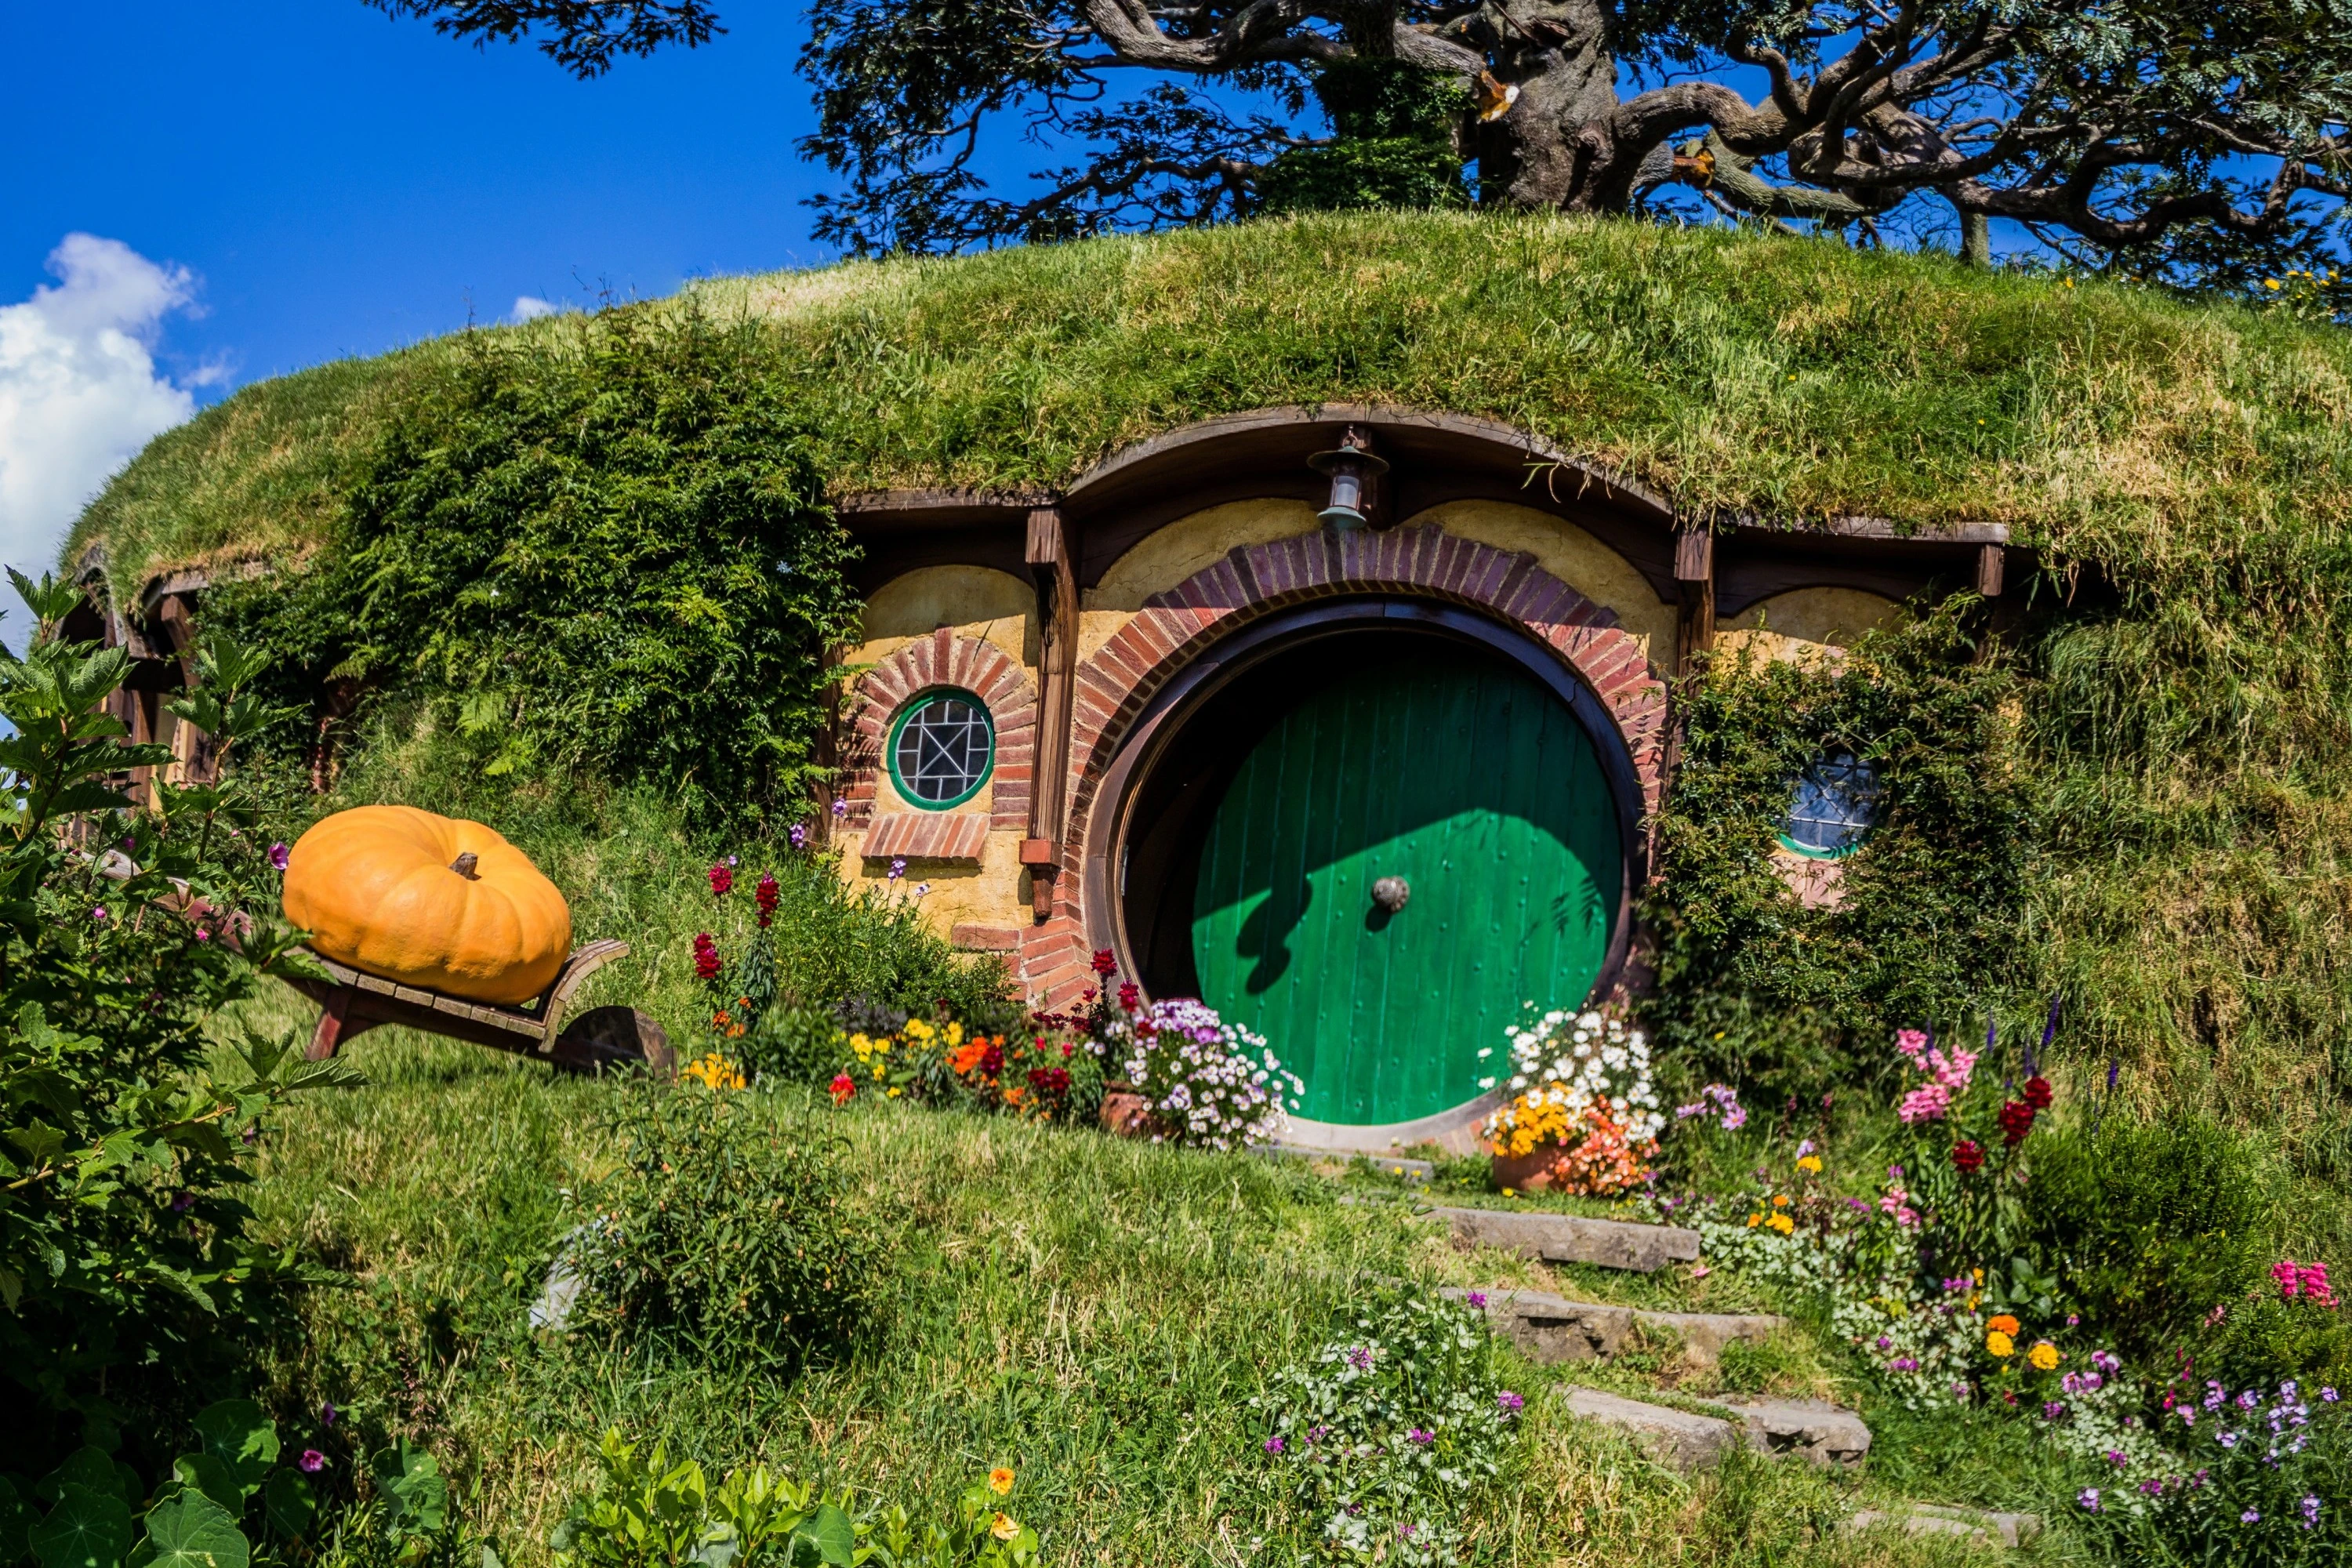 Lord of the Rings Filming Locations in New Zealand: What to visit and how to get there